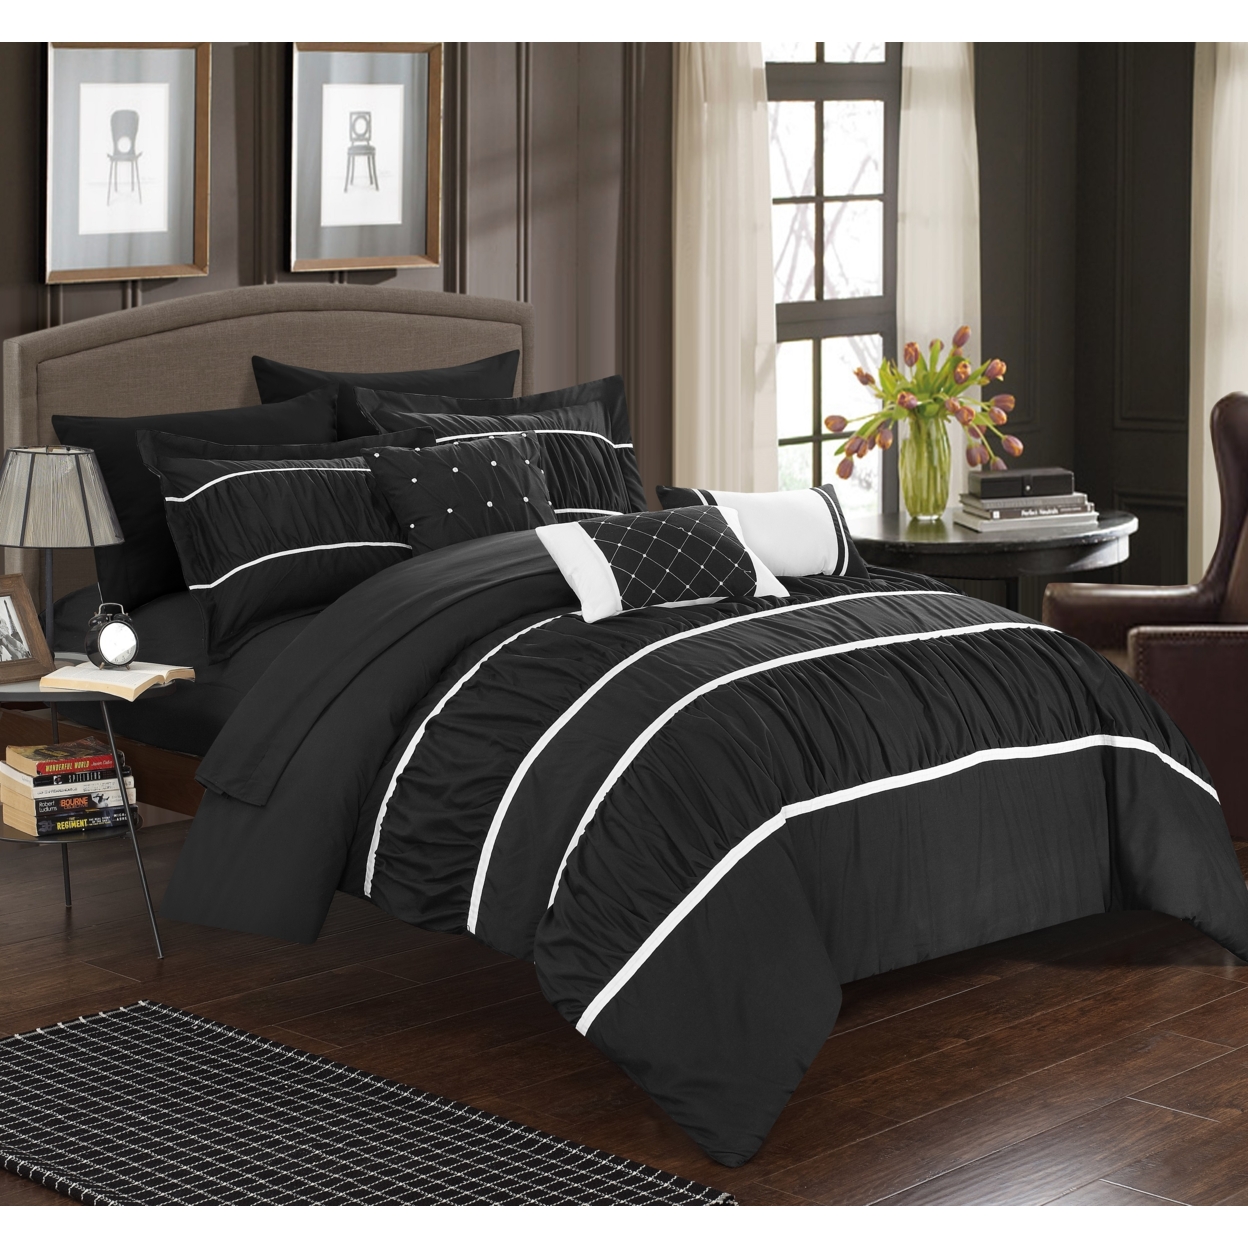 10-Piece Aero Pleated & Ruffled Bed In A Bag Comforter And Sheet Set - Black, Queen